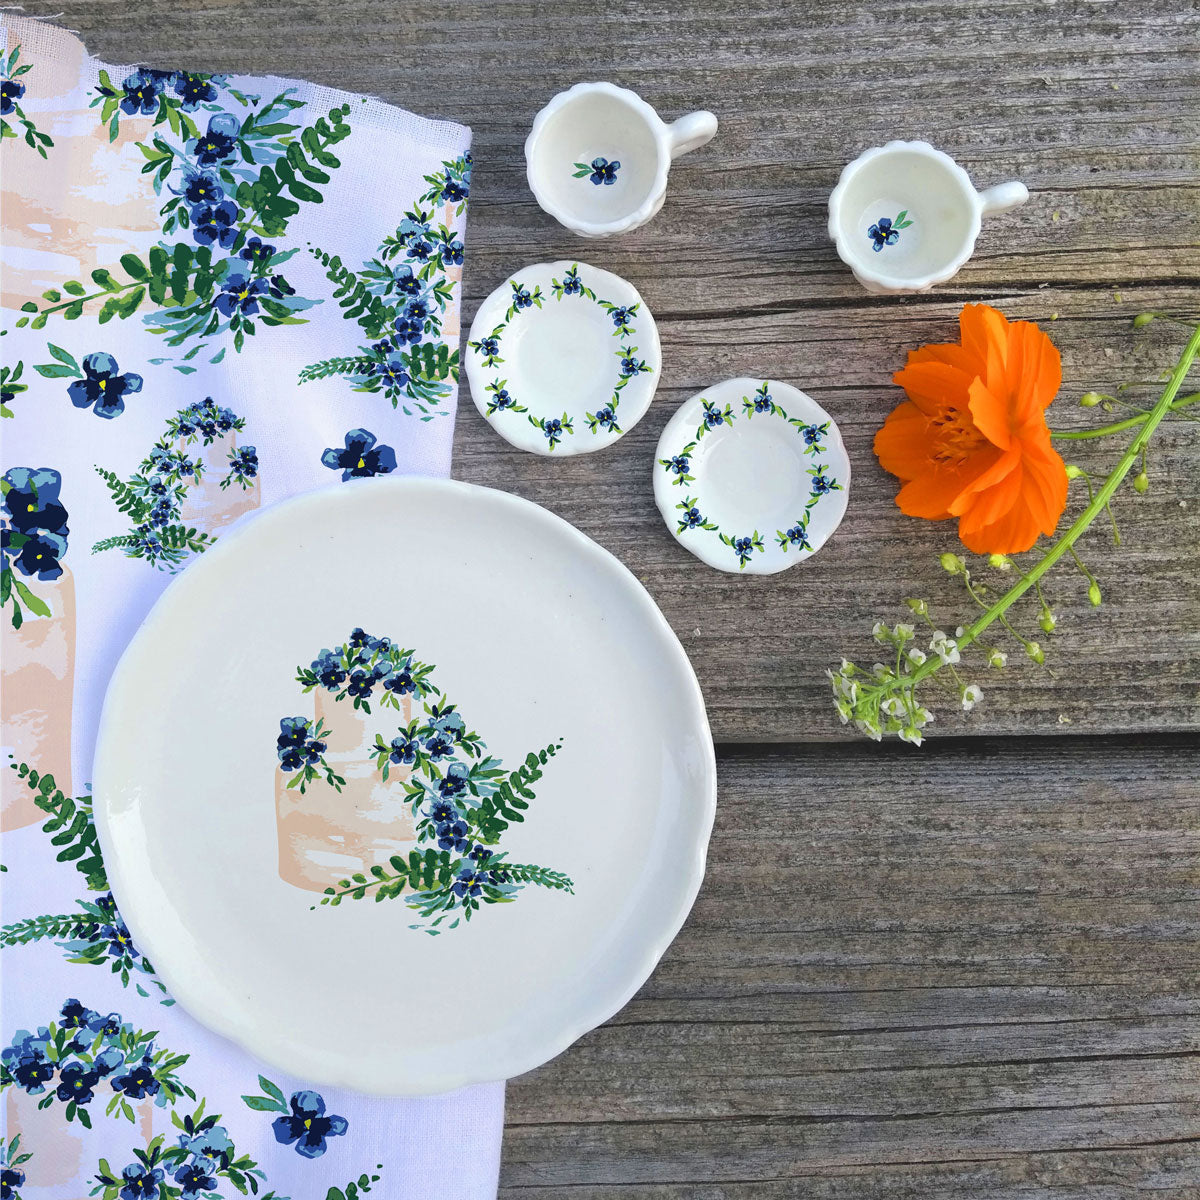 Five Patch Design pansy tableware